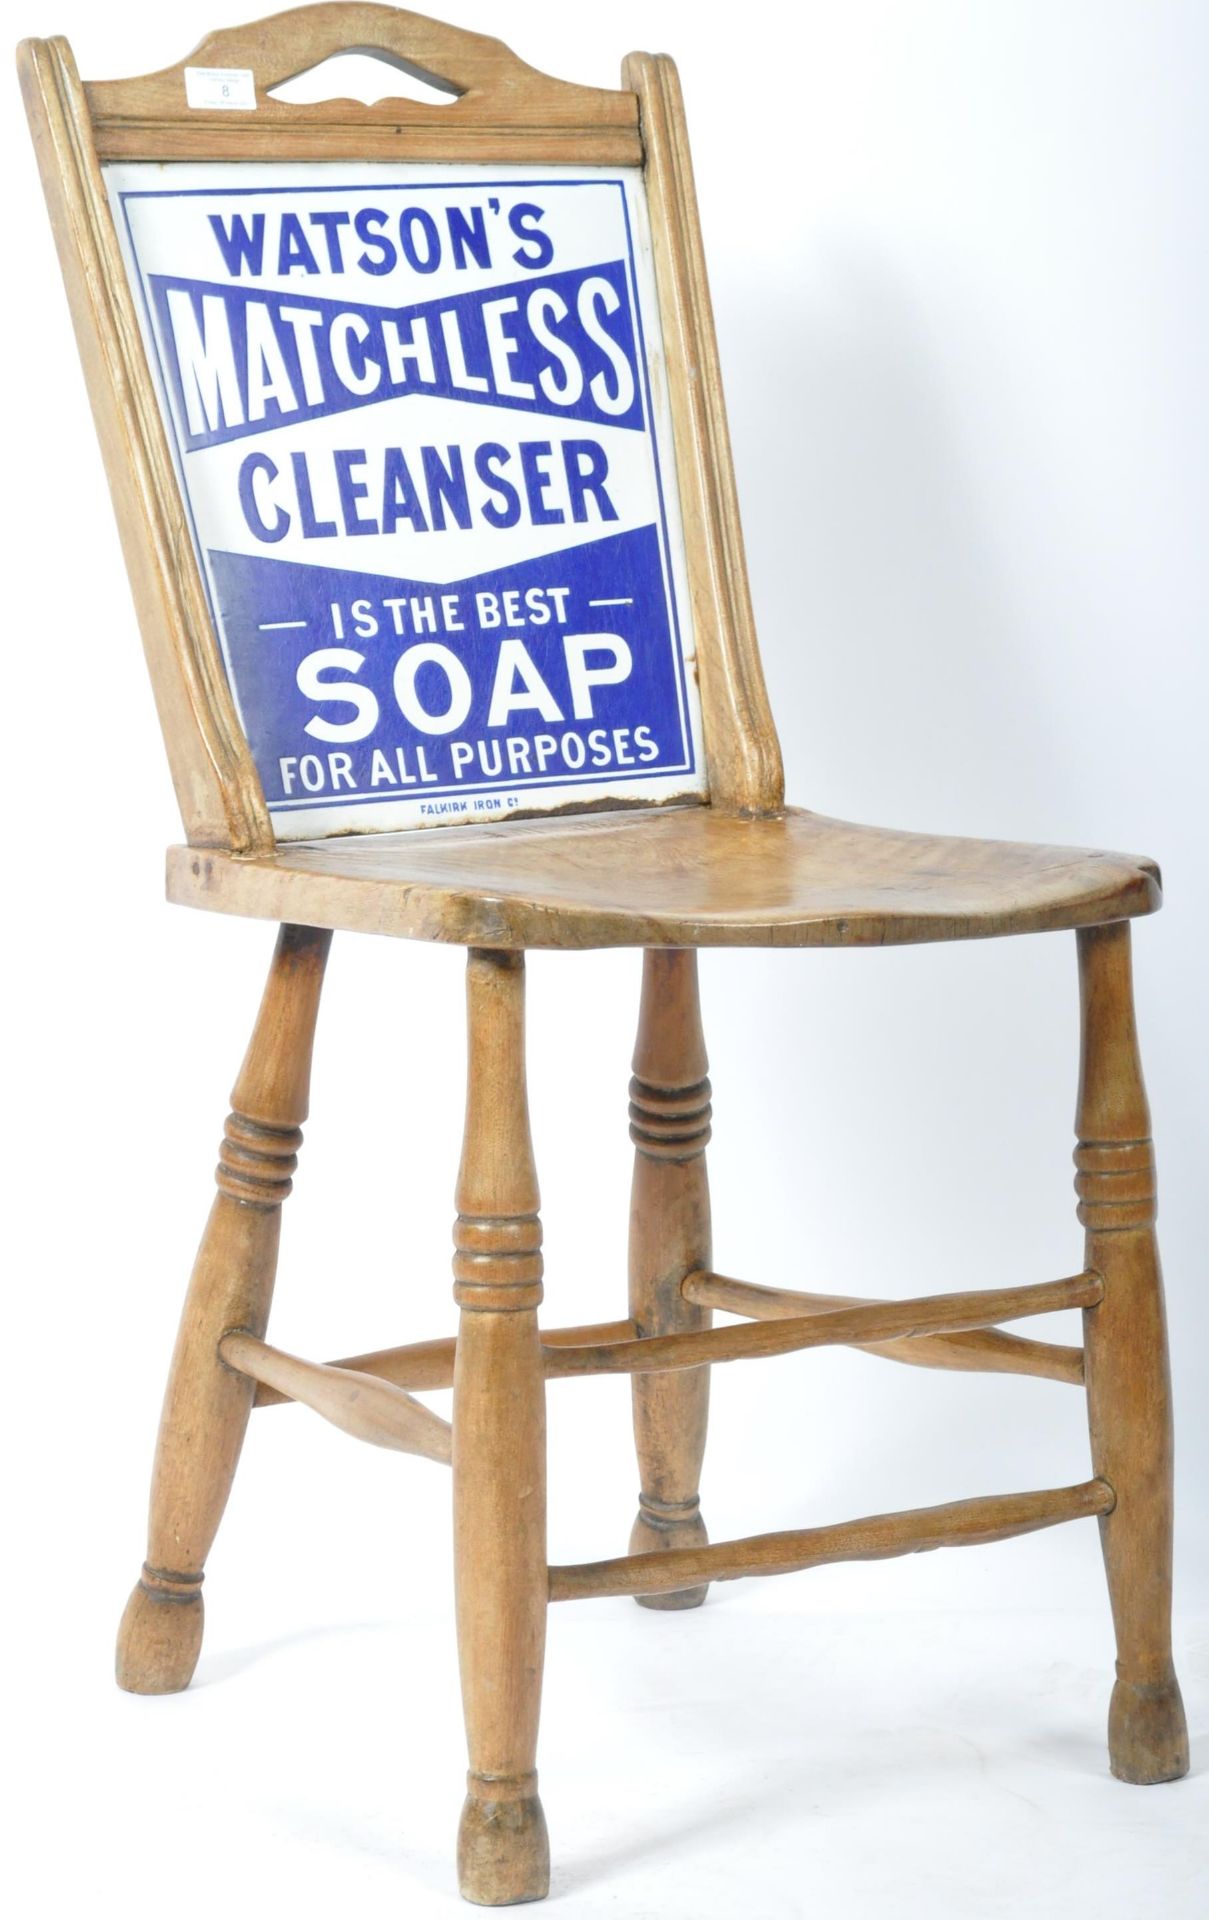 WATSON'S SOAP ANTIQUE ADVERTISING ENAMEL BACKED CHAIR